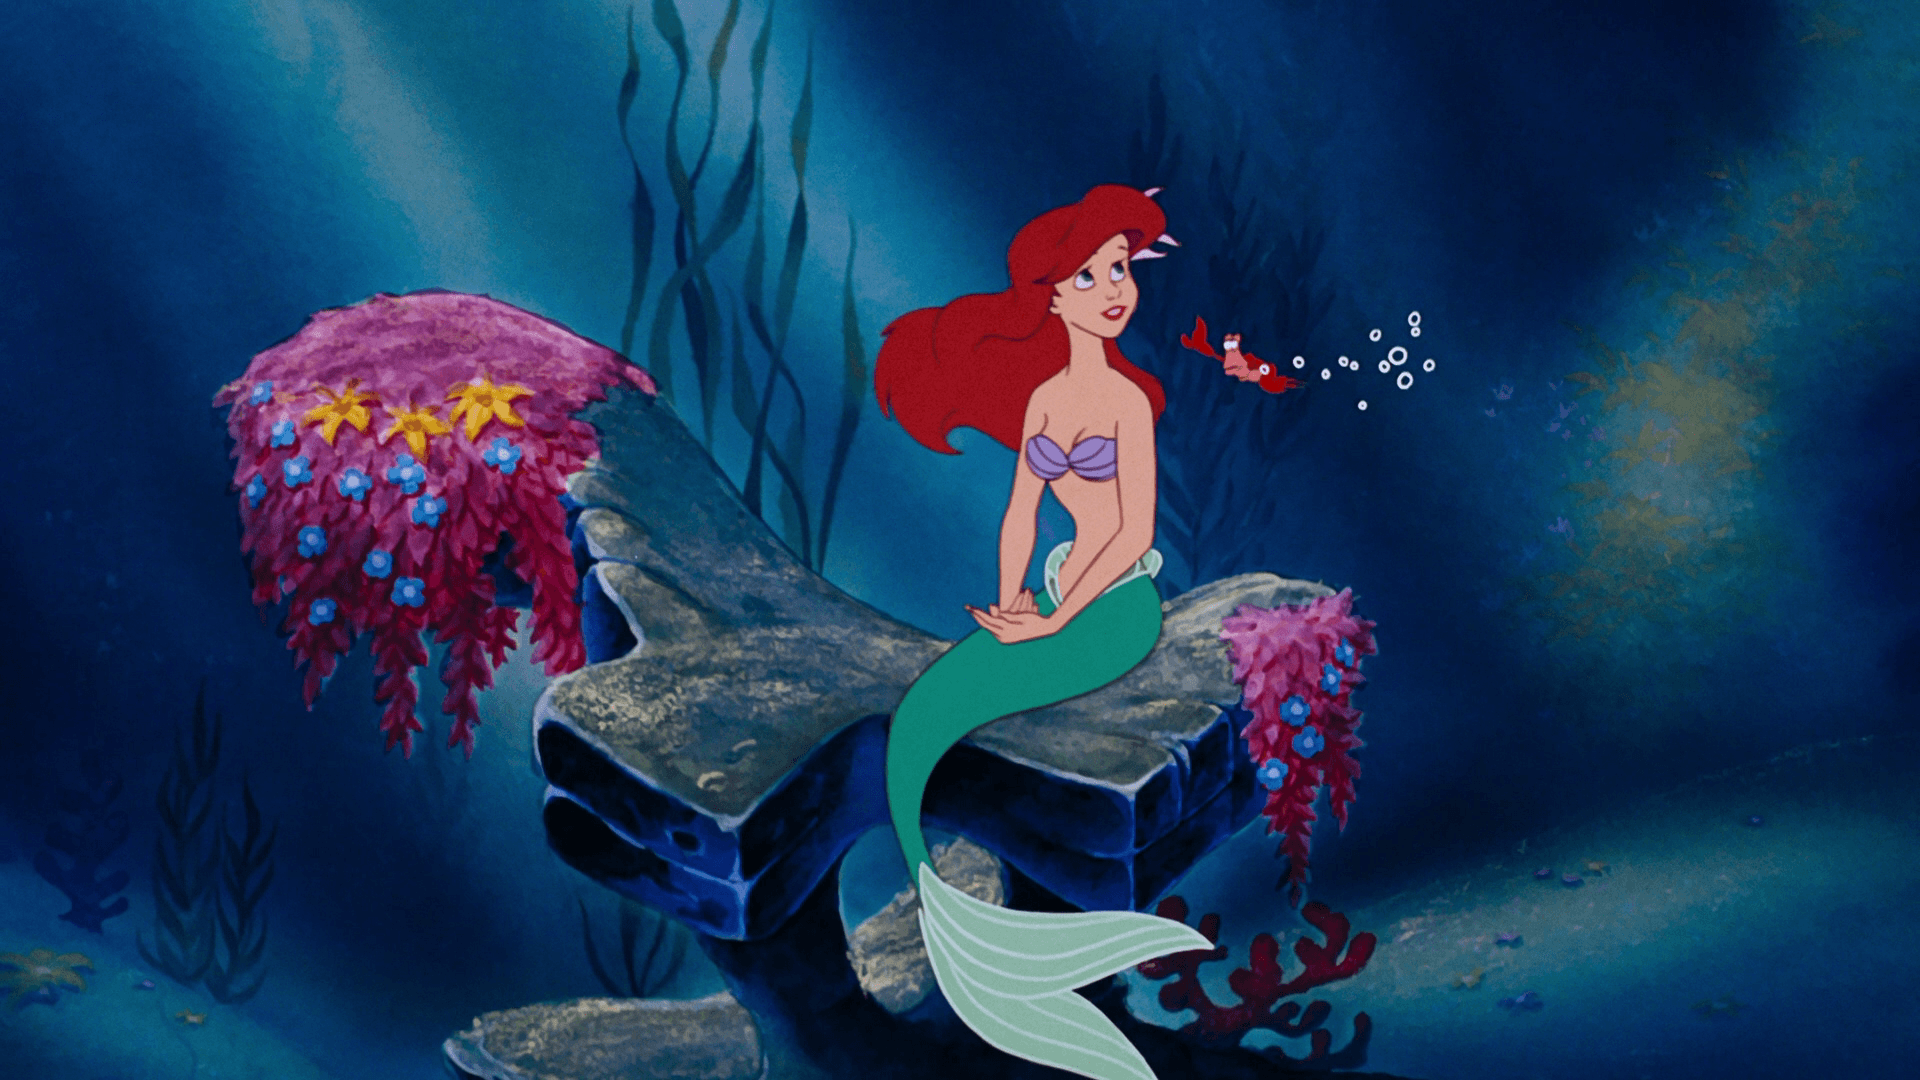 Little Mermaid Live Wallpapers Wallpaper Cave Images, Photos, Reviews